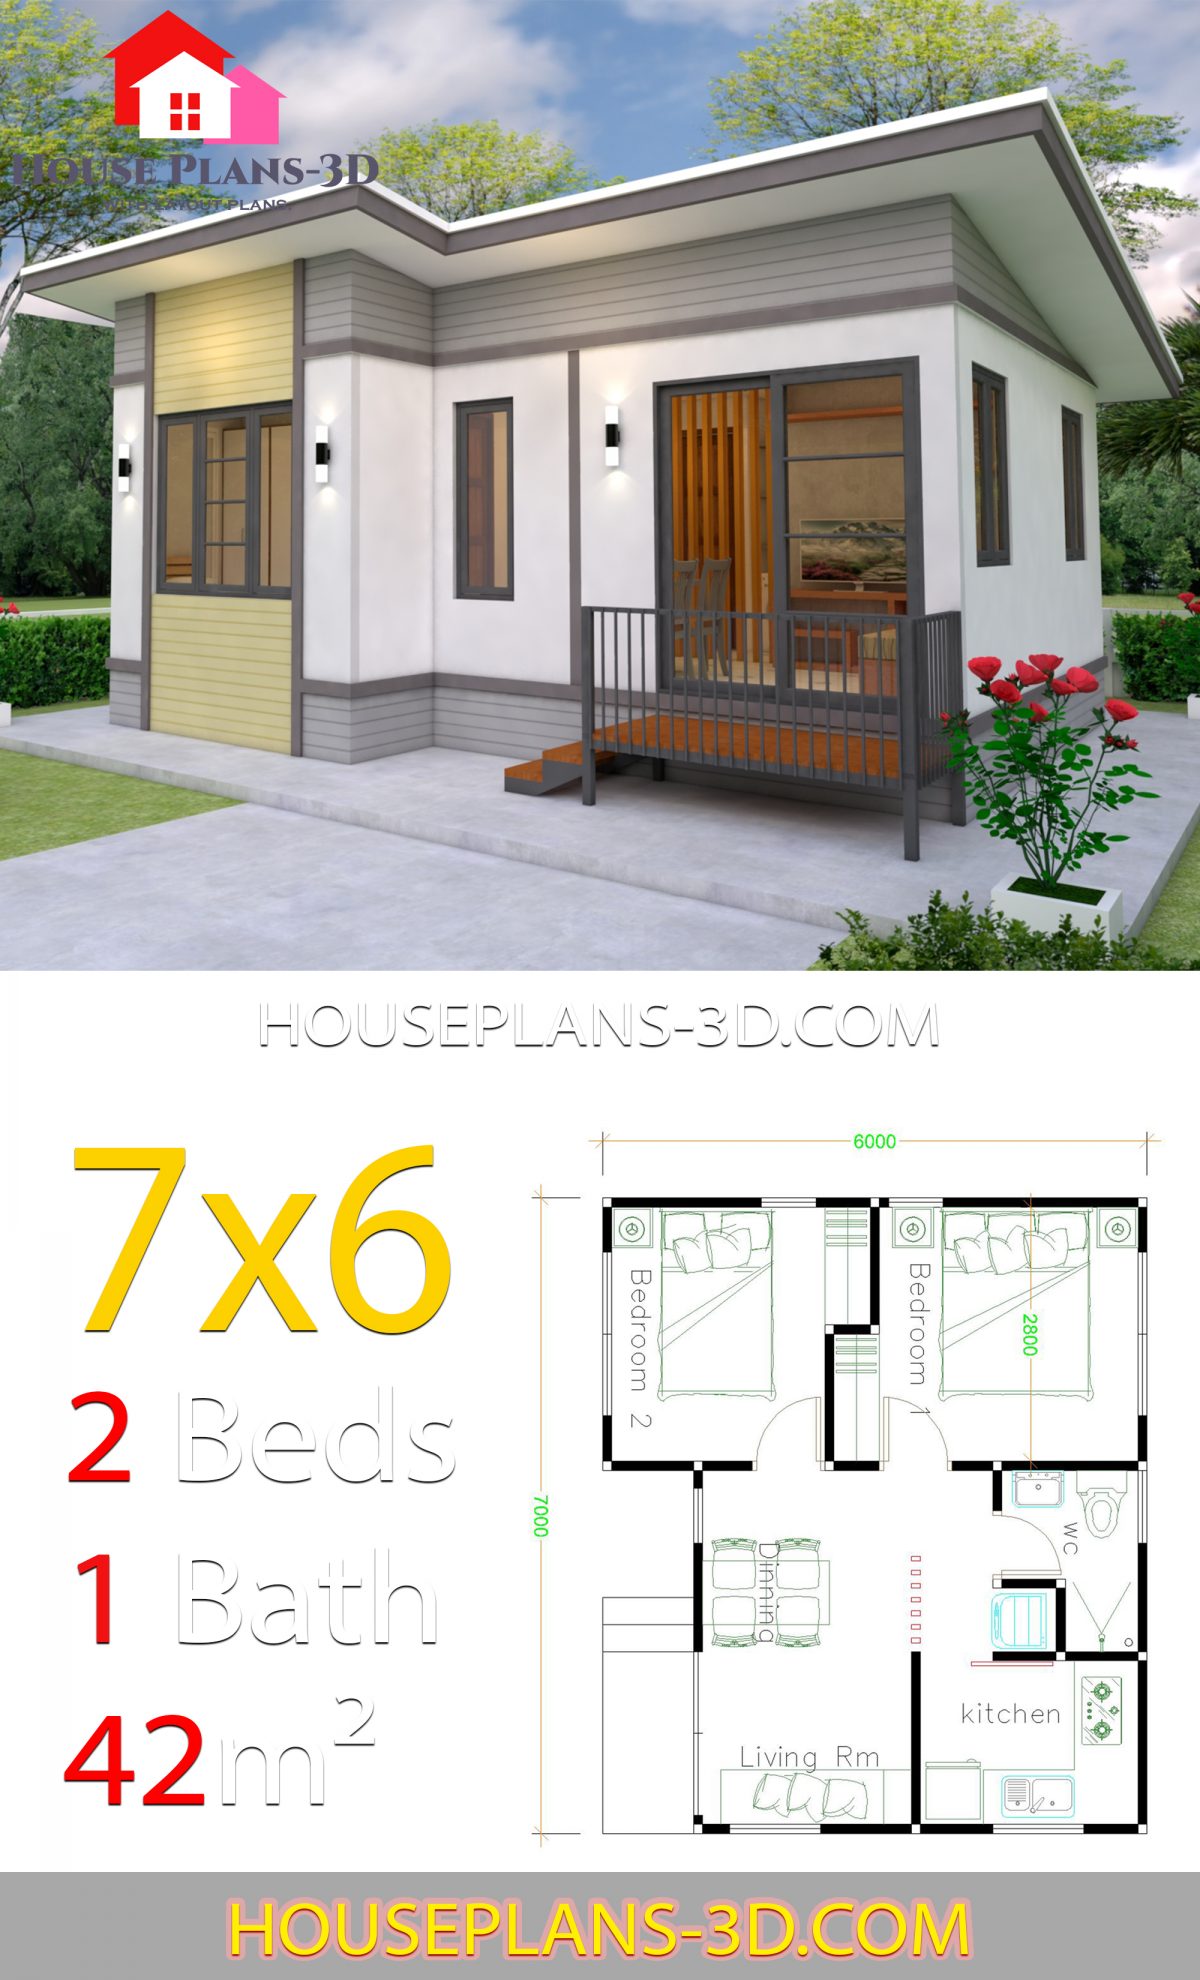 Small House plans 7x6 with 2 Bedrooms - House Plans 3D